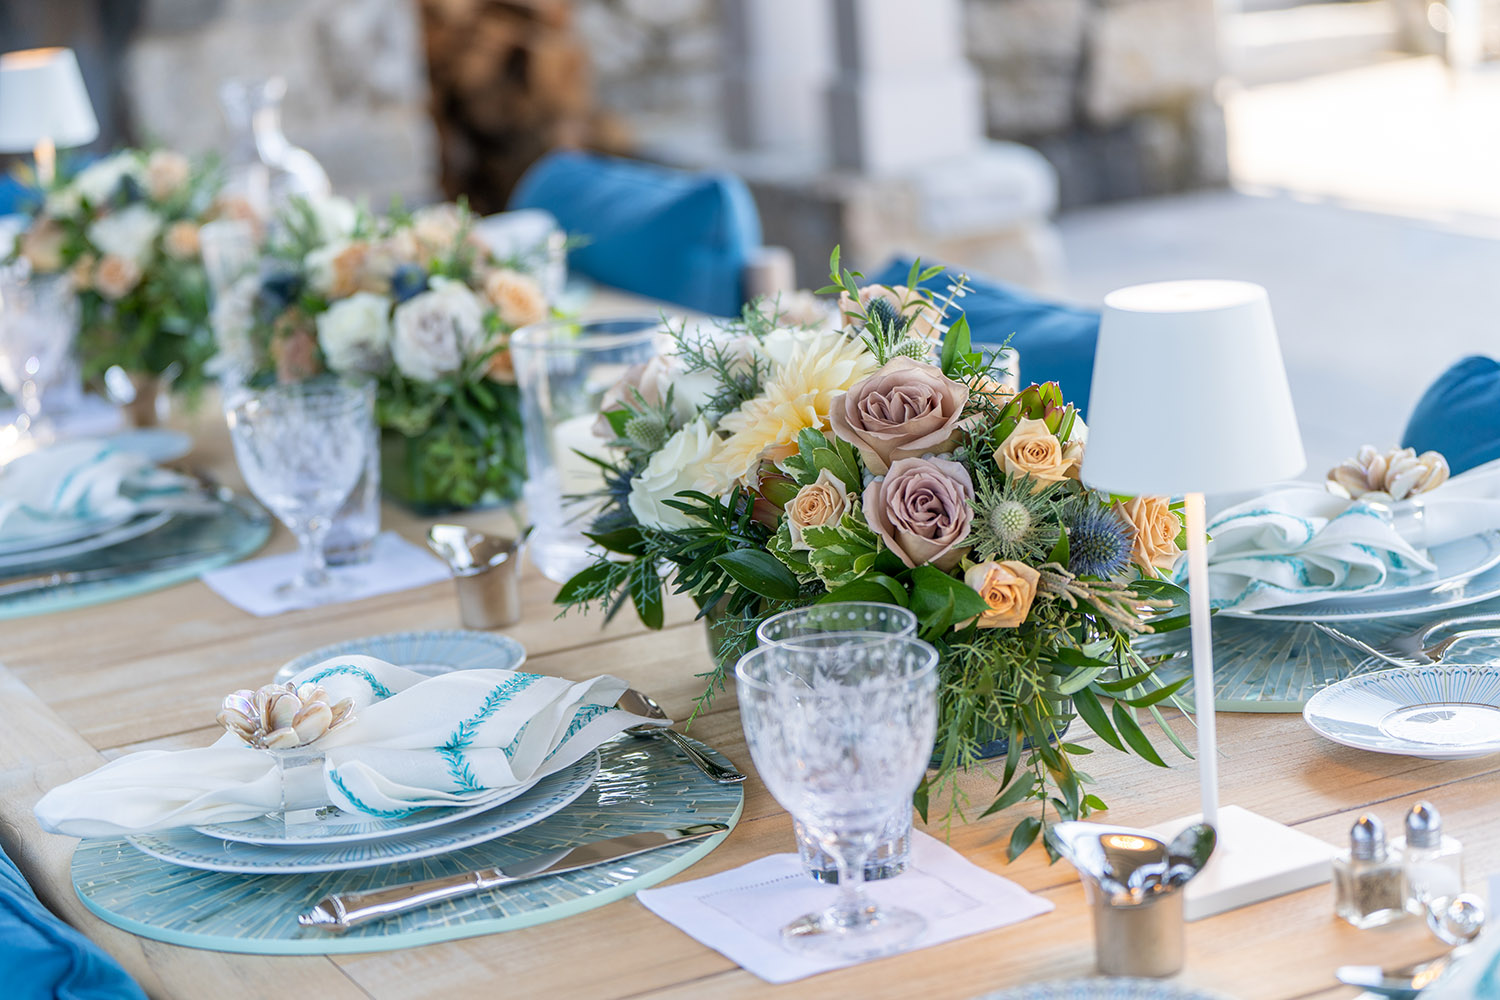 Flower arrangements and table settings at Anne Hamilton's dinner party